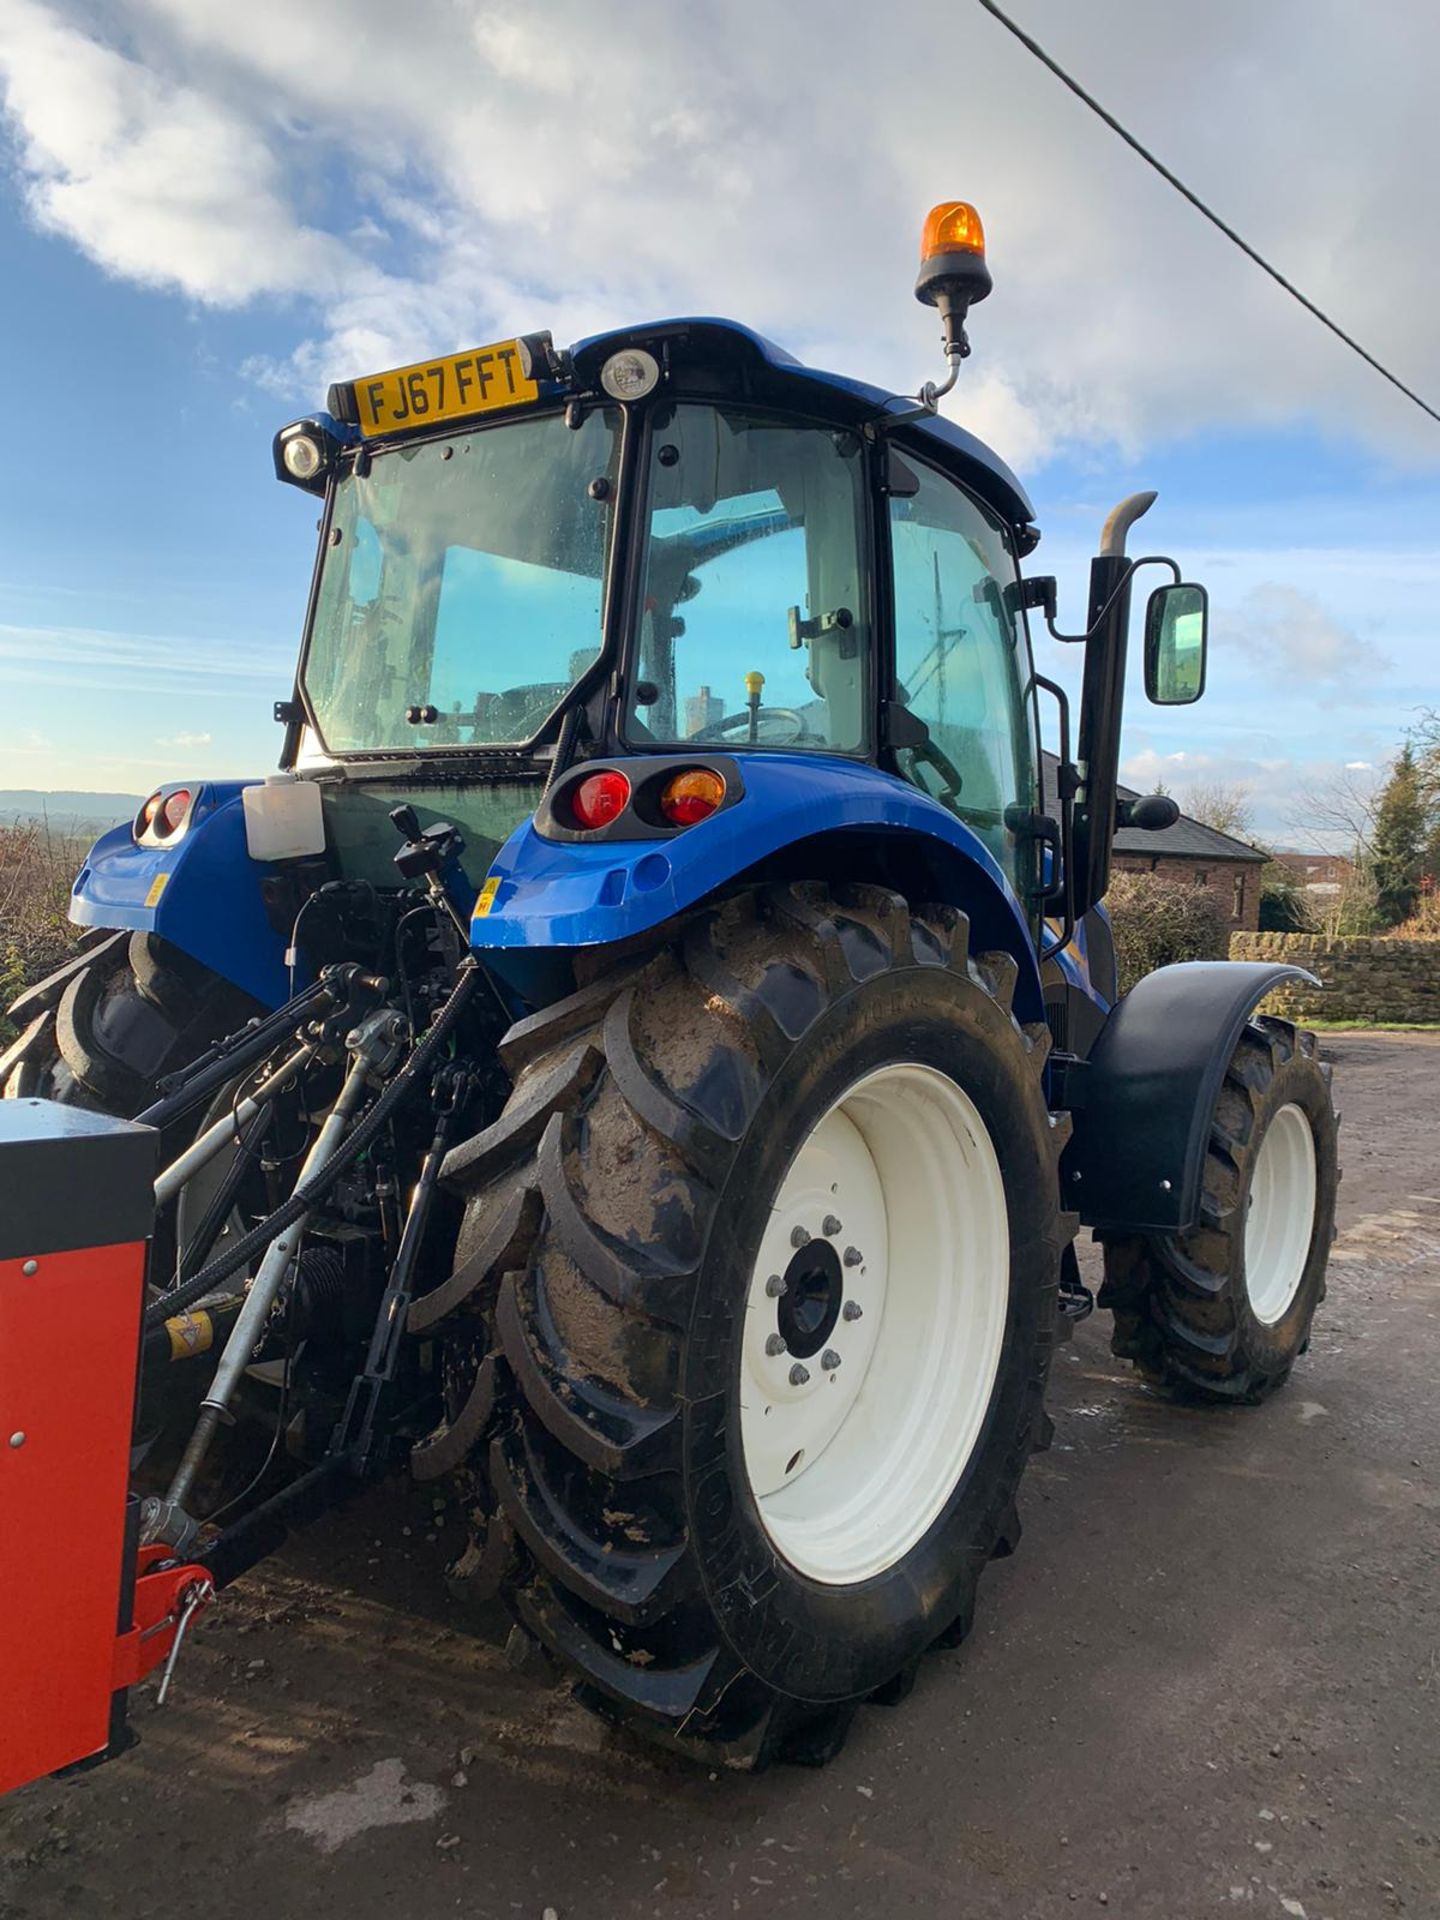 2017/67 REG NEW HOLLAND T4.85 4WD DIESEL TRACTOR, FULL GLASS CAB, HEDGECUTTER SOLD SEPERATELY - Image 6 of 20